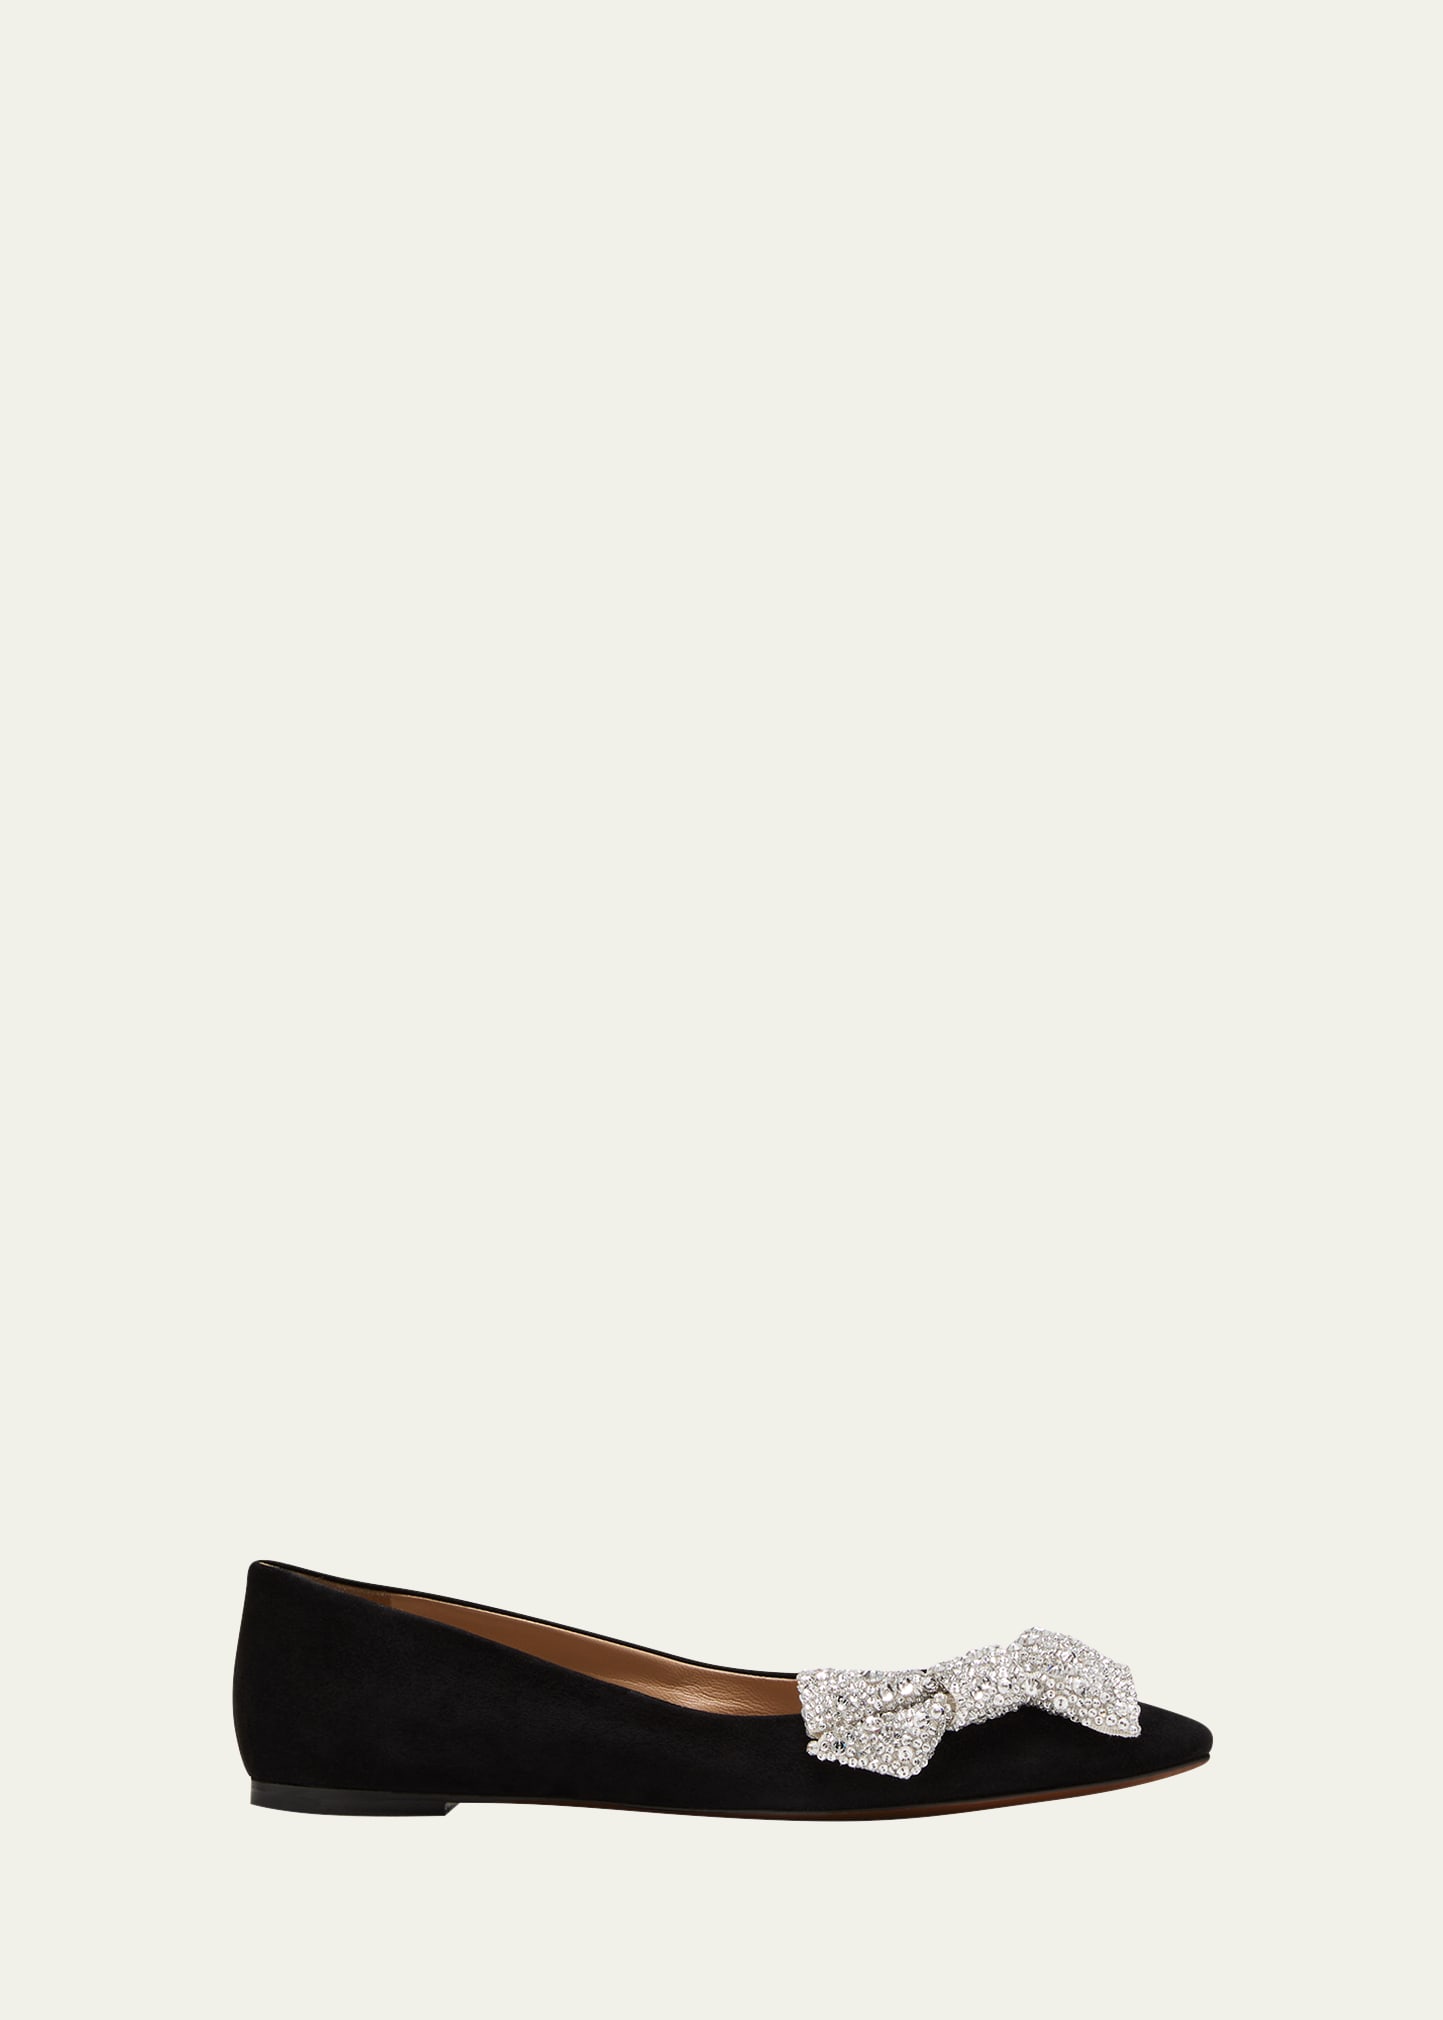 Chloé Thea Suede Crystal Bow Ballerina Flats In Black